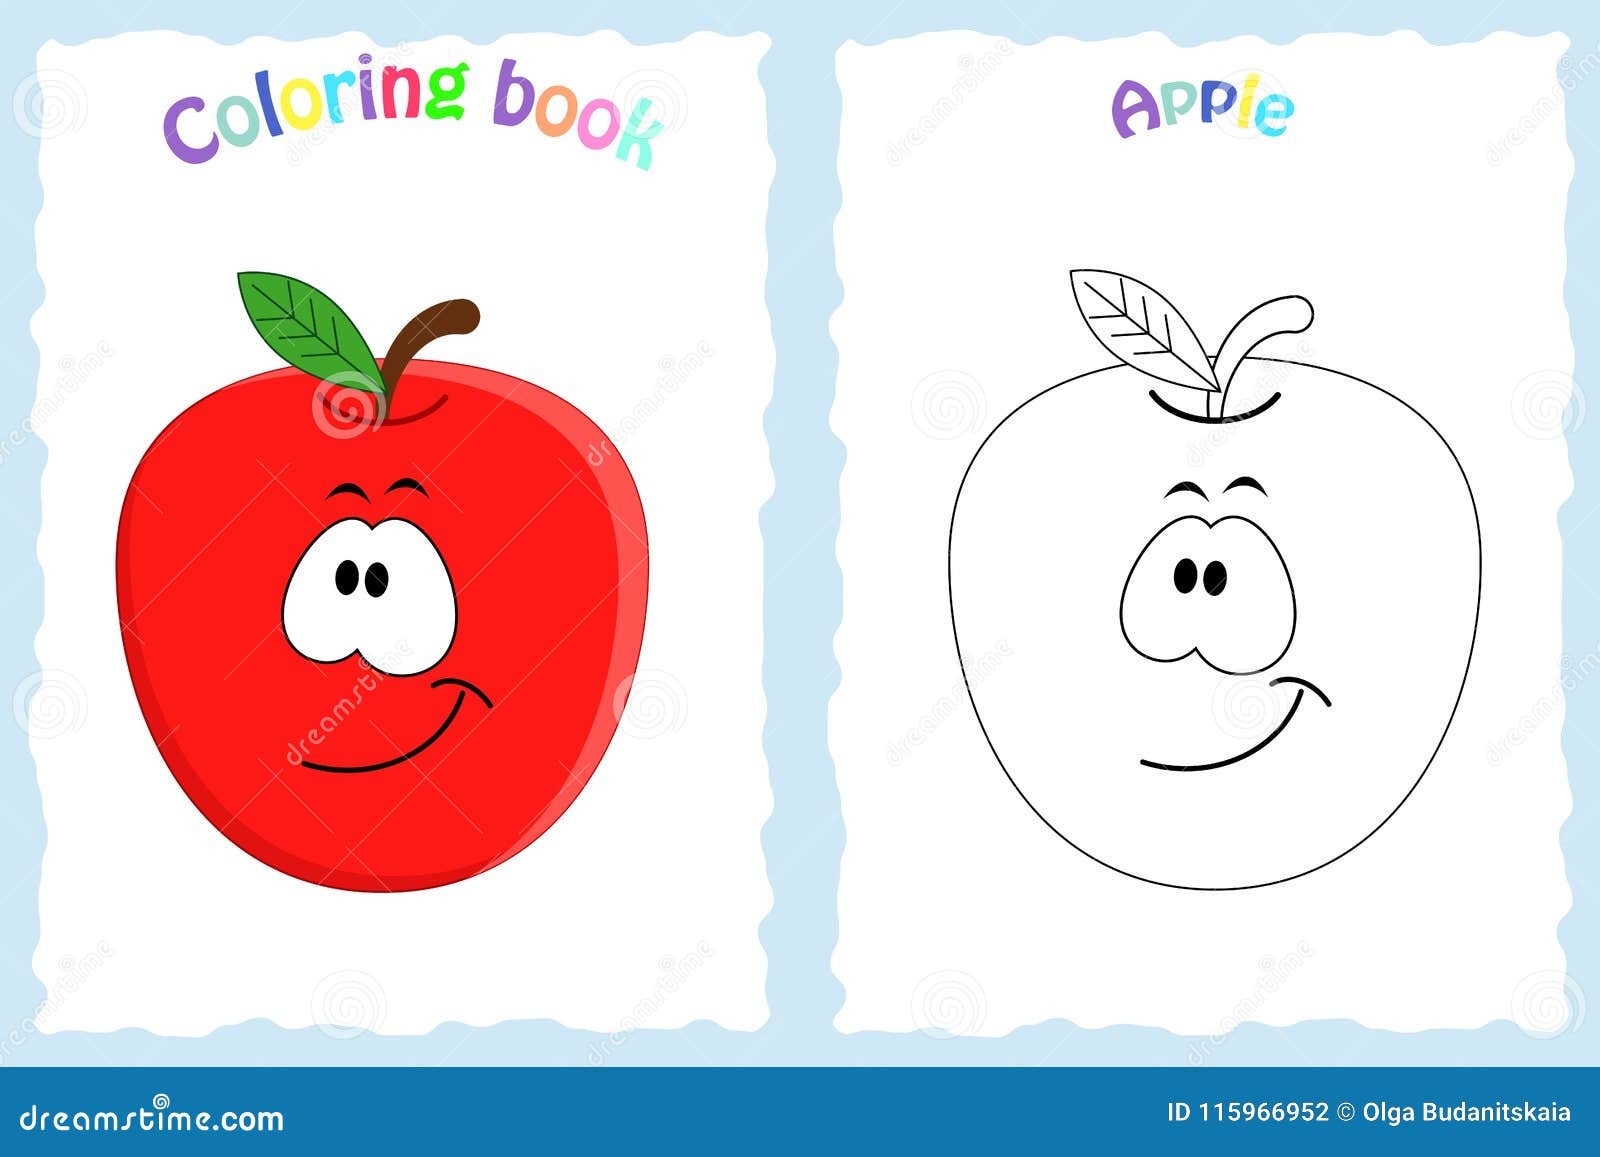 How to Draw An Apple for Kids  A Step By Step Guide With Pictures